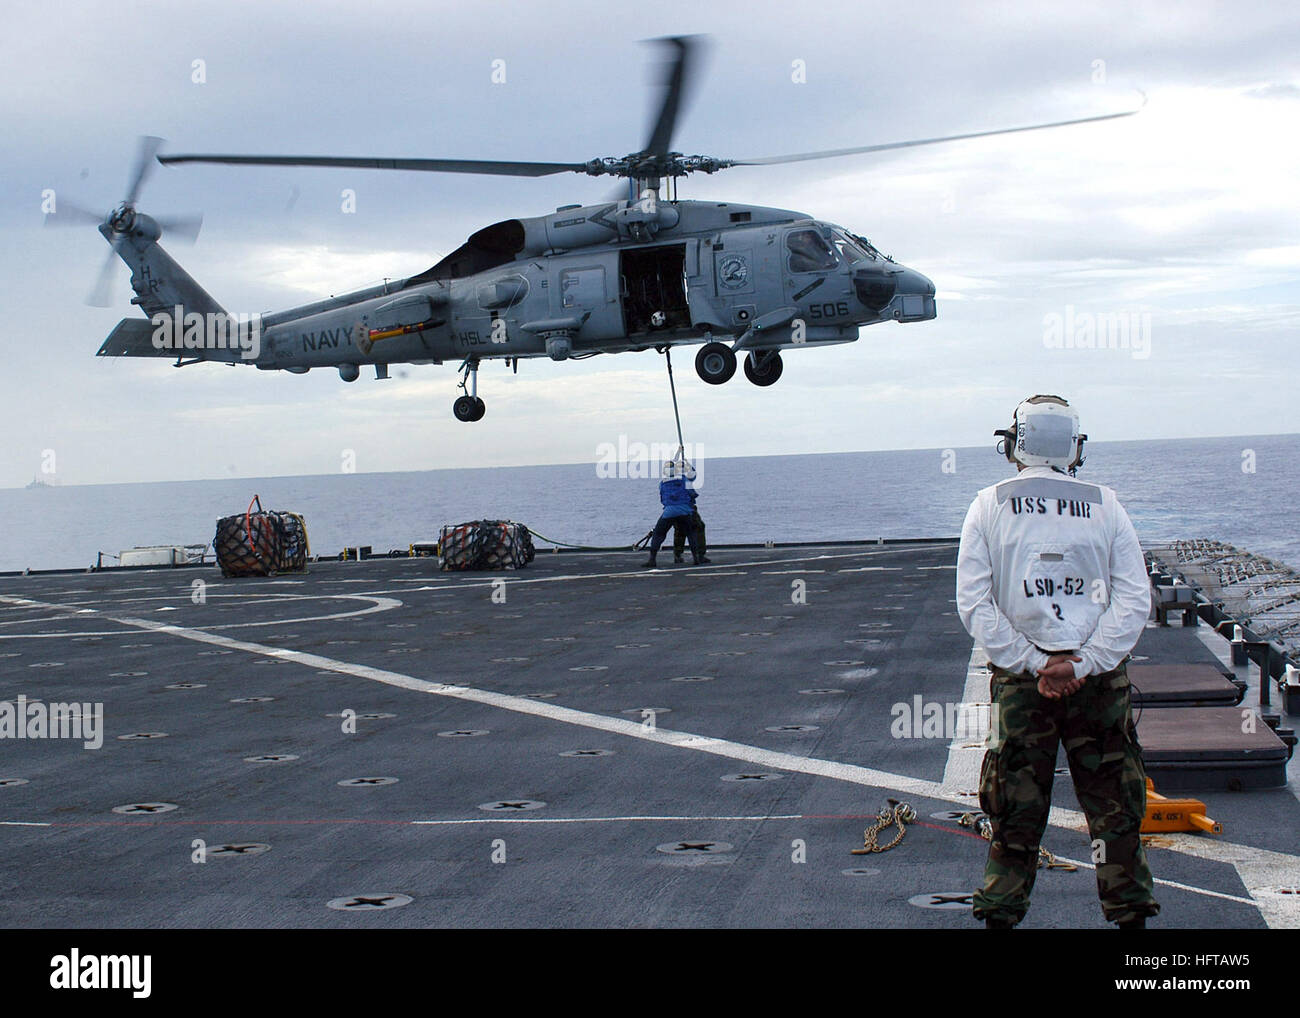 070416-N-4021H-130  ATLANTIC OCEAN (April 16, 2007) - An SH-60B Seahawk, assigned to Anti-Submarine Squadron (HSL) 48, picks up pallets on the flight deck of dock landing ship USS Pearl Harbor (LSD 52) during a vertical replenishment to deliver food, medical supplies and toys to guided missile destroyer USS Mitscher (DDG 57) for distribution in Montevideo, Uruguay, during Partnership of the Americas (POA) 2007. POA will focus on enhancing relationships with partner nations through a variety of exercises and events at sea and on shore throughout South America and the Caribbean. U.S. Navy Photo  Stock Photo